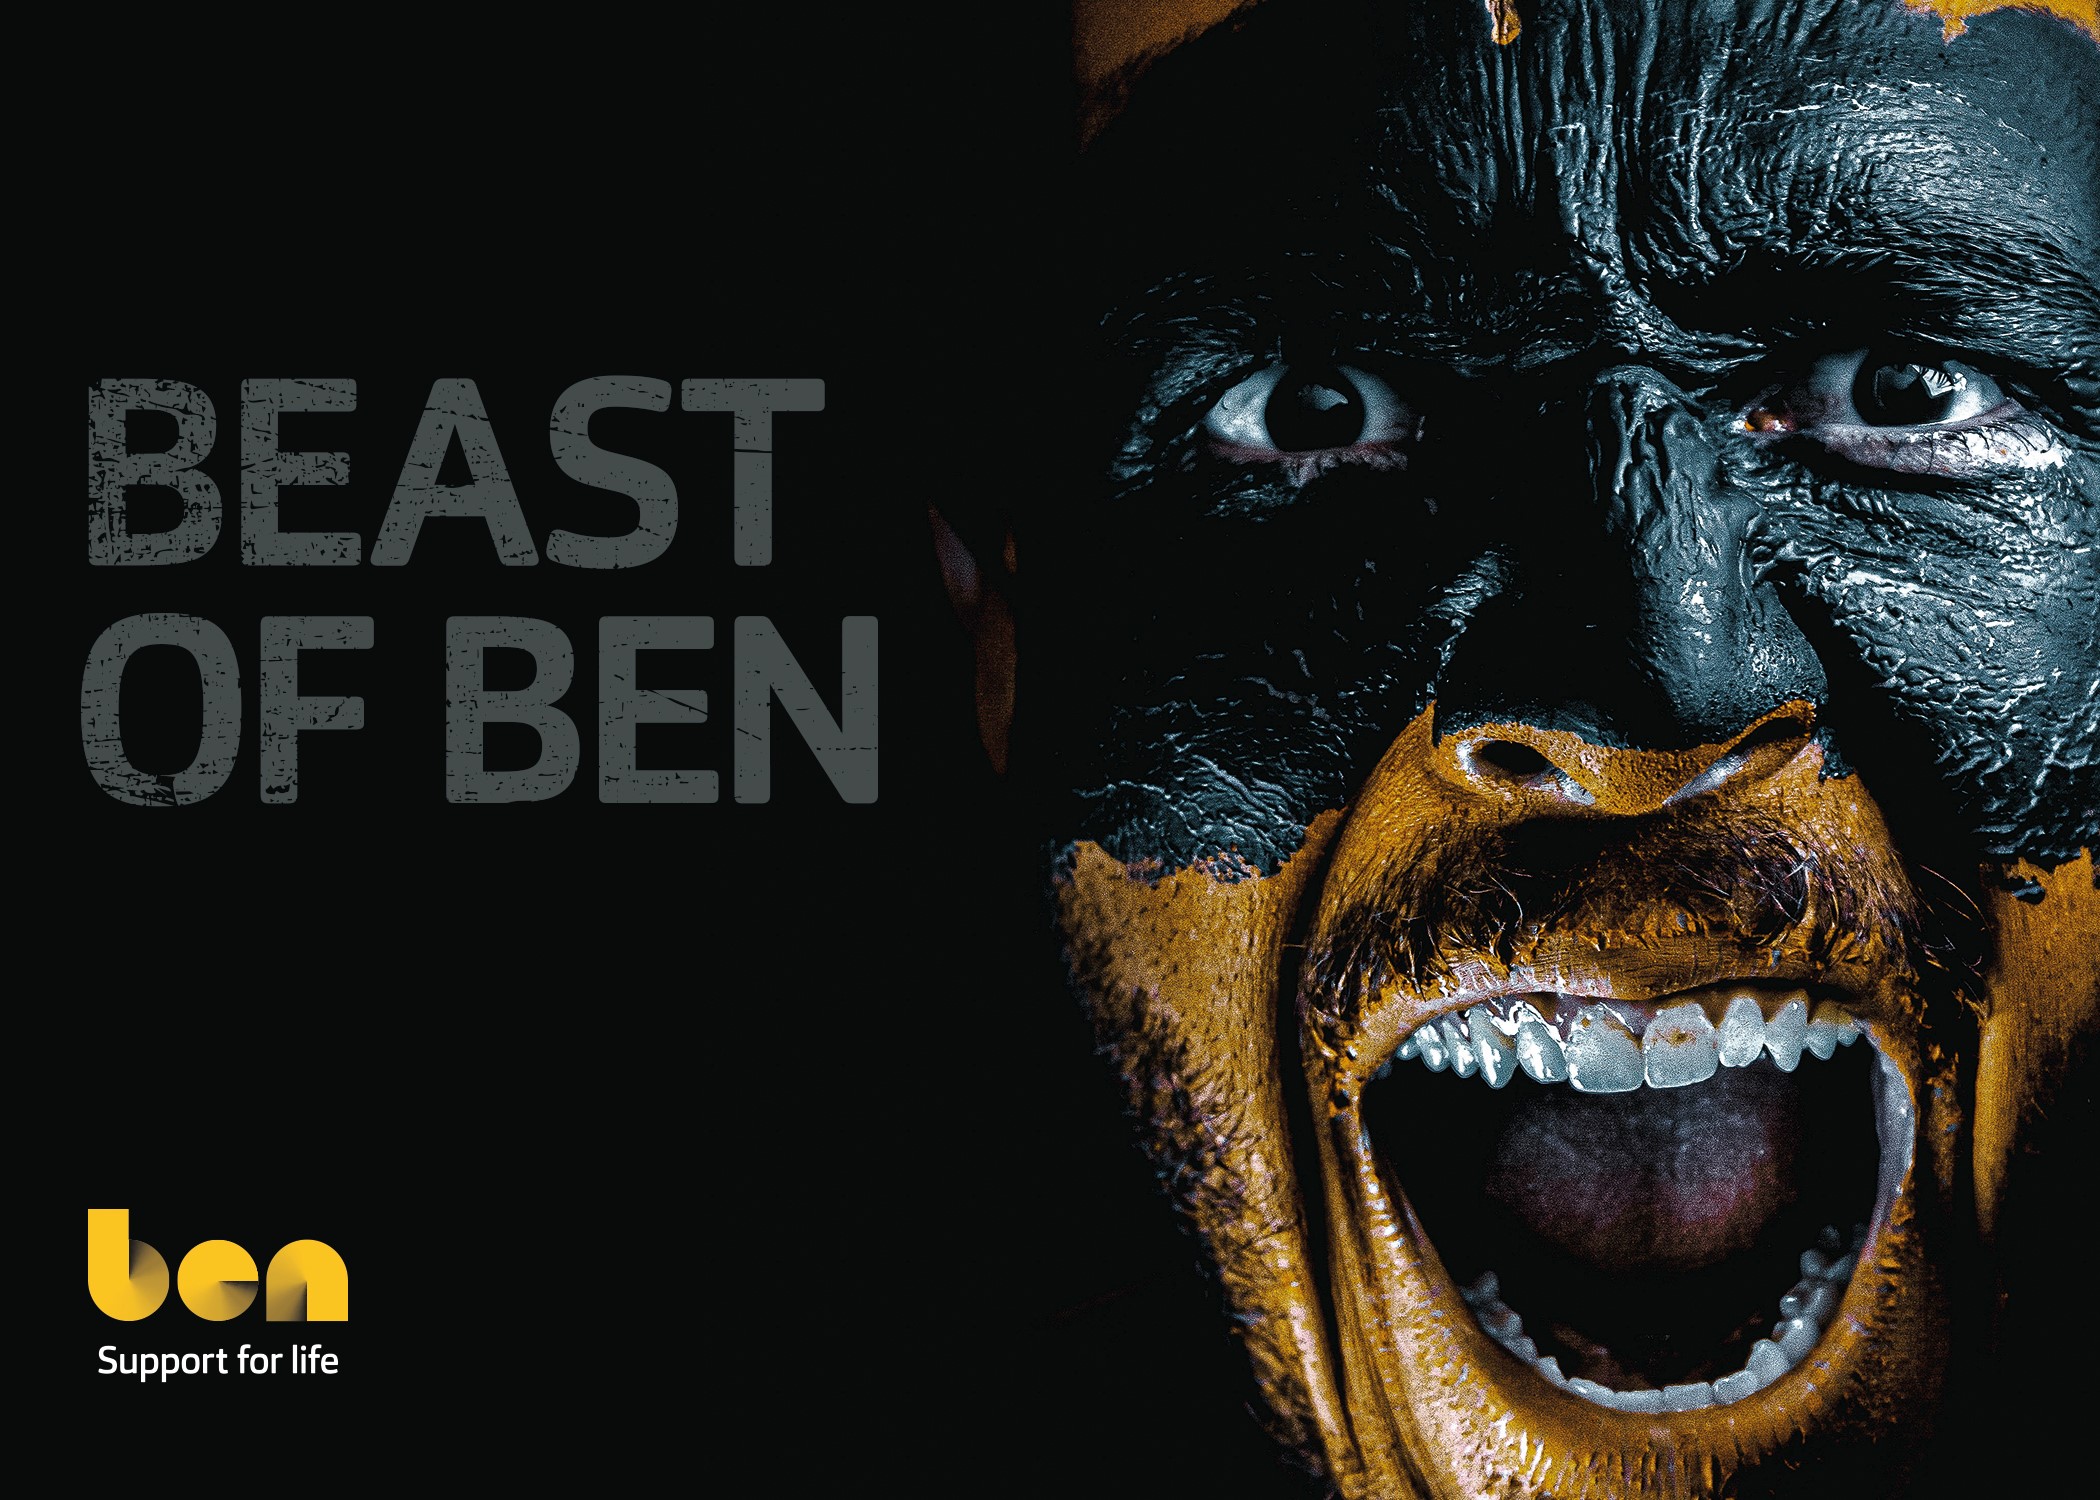 Are you ready to take on the Beast of Ben?